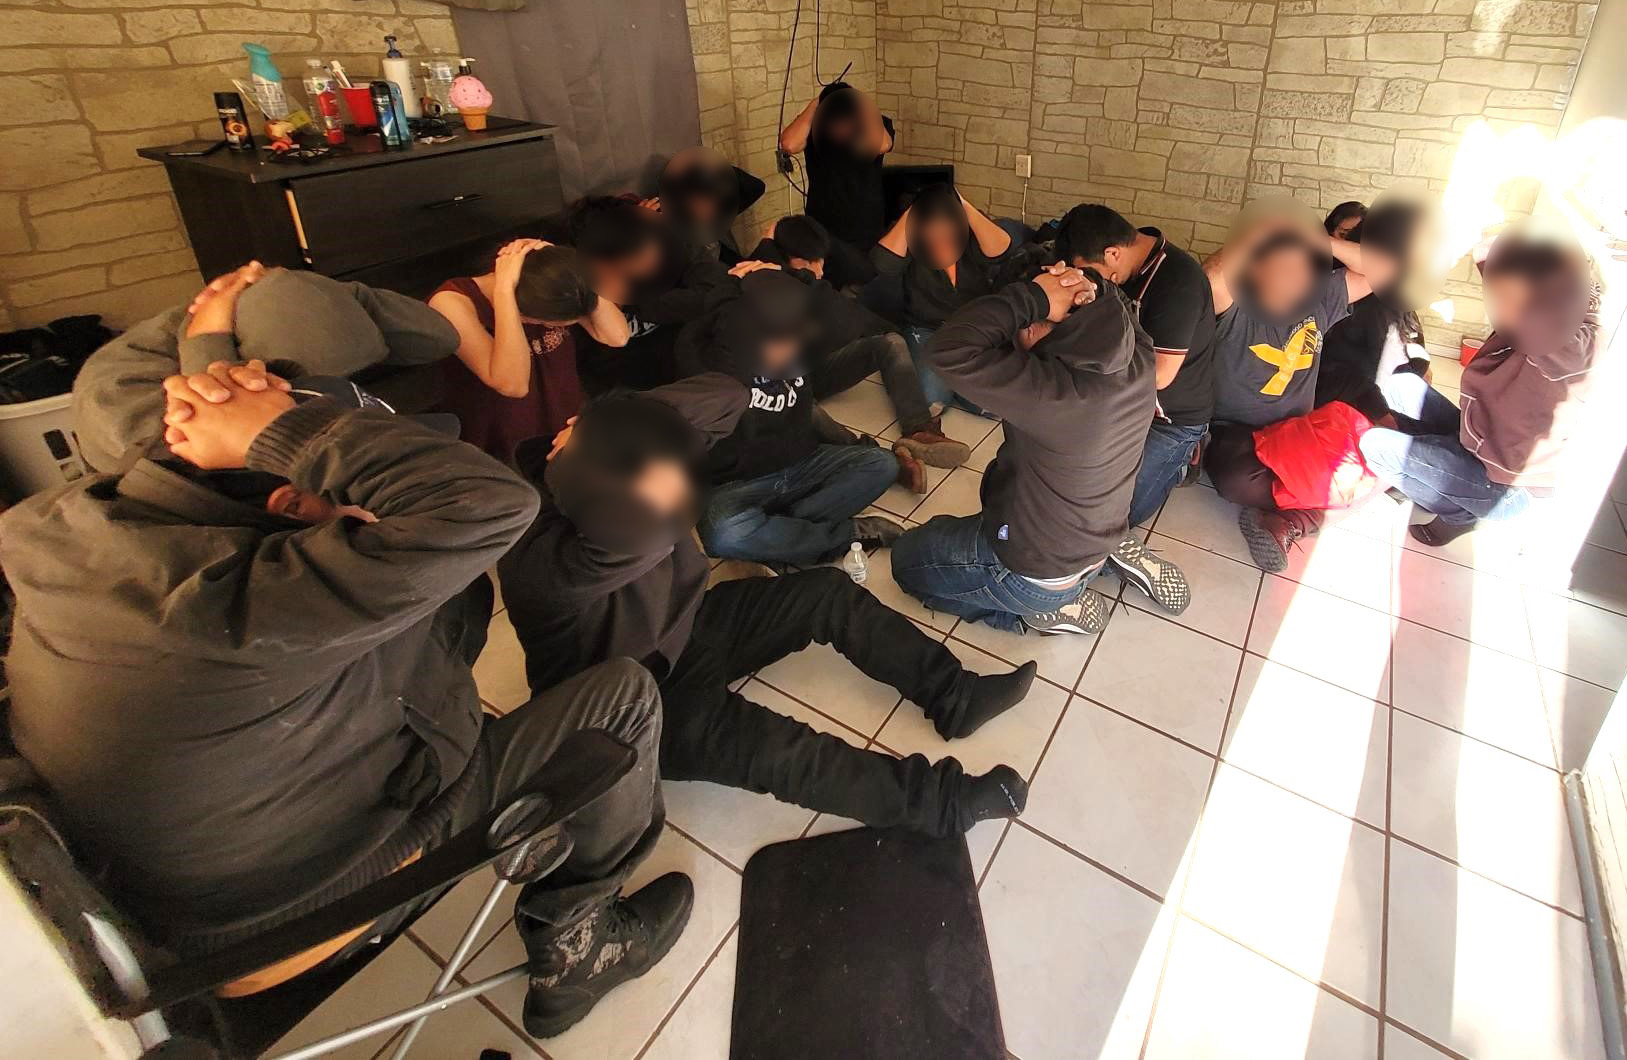 HSI El Paso and USBP arrest 25 undocumented noncitizens, 2 alleged smugglers; seize nearly $3,000